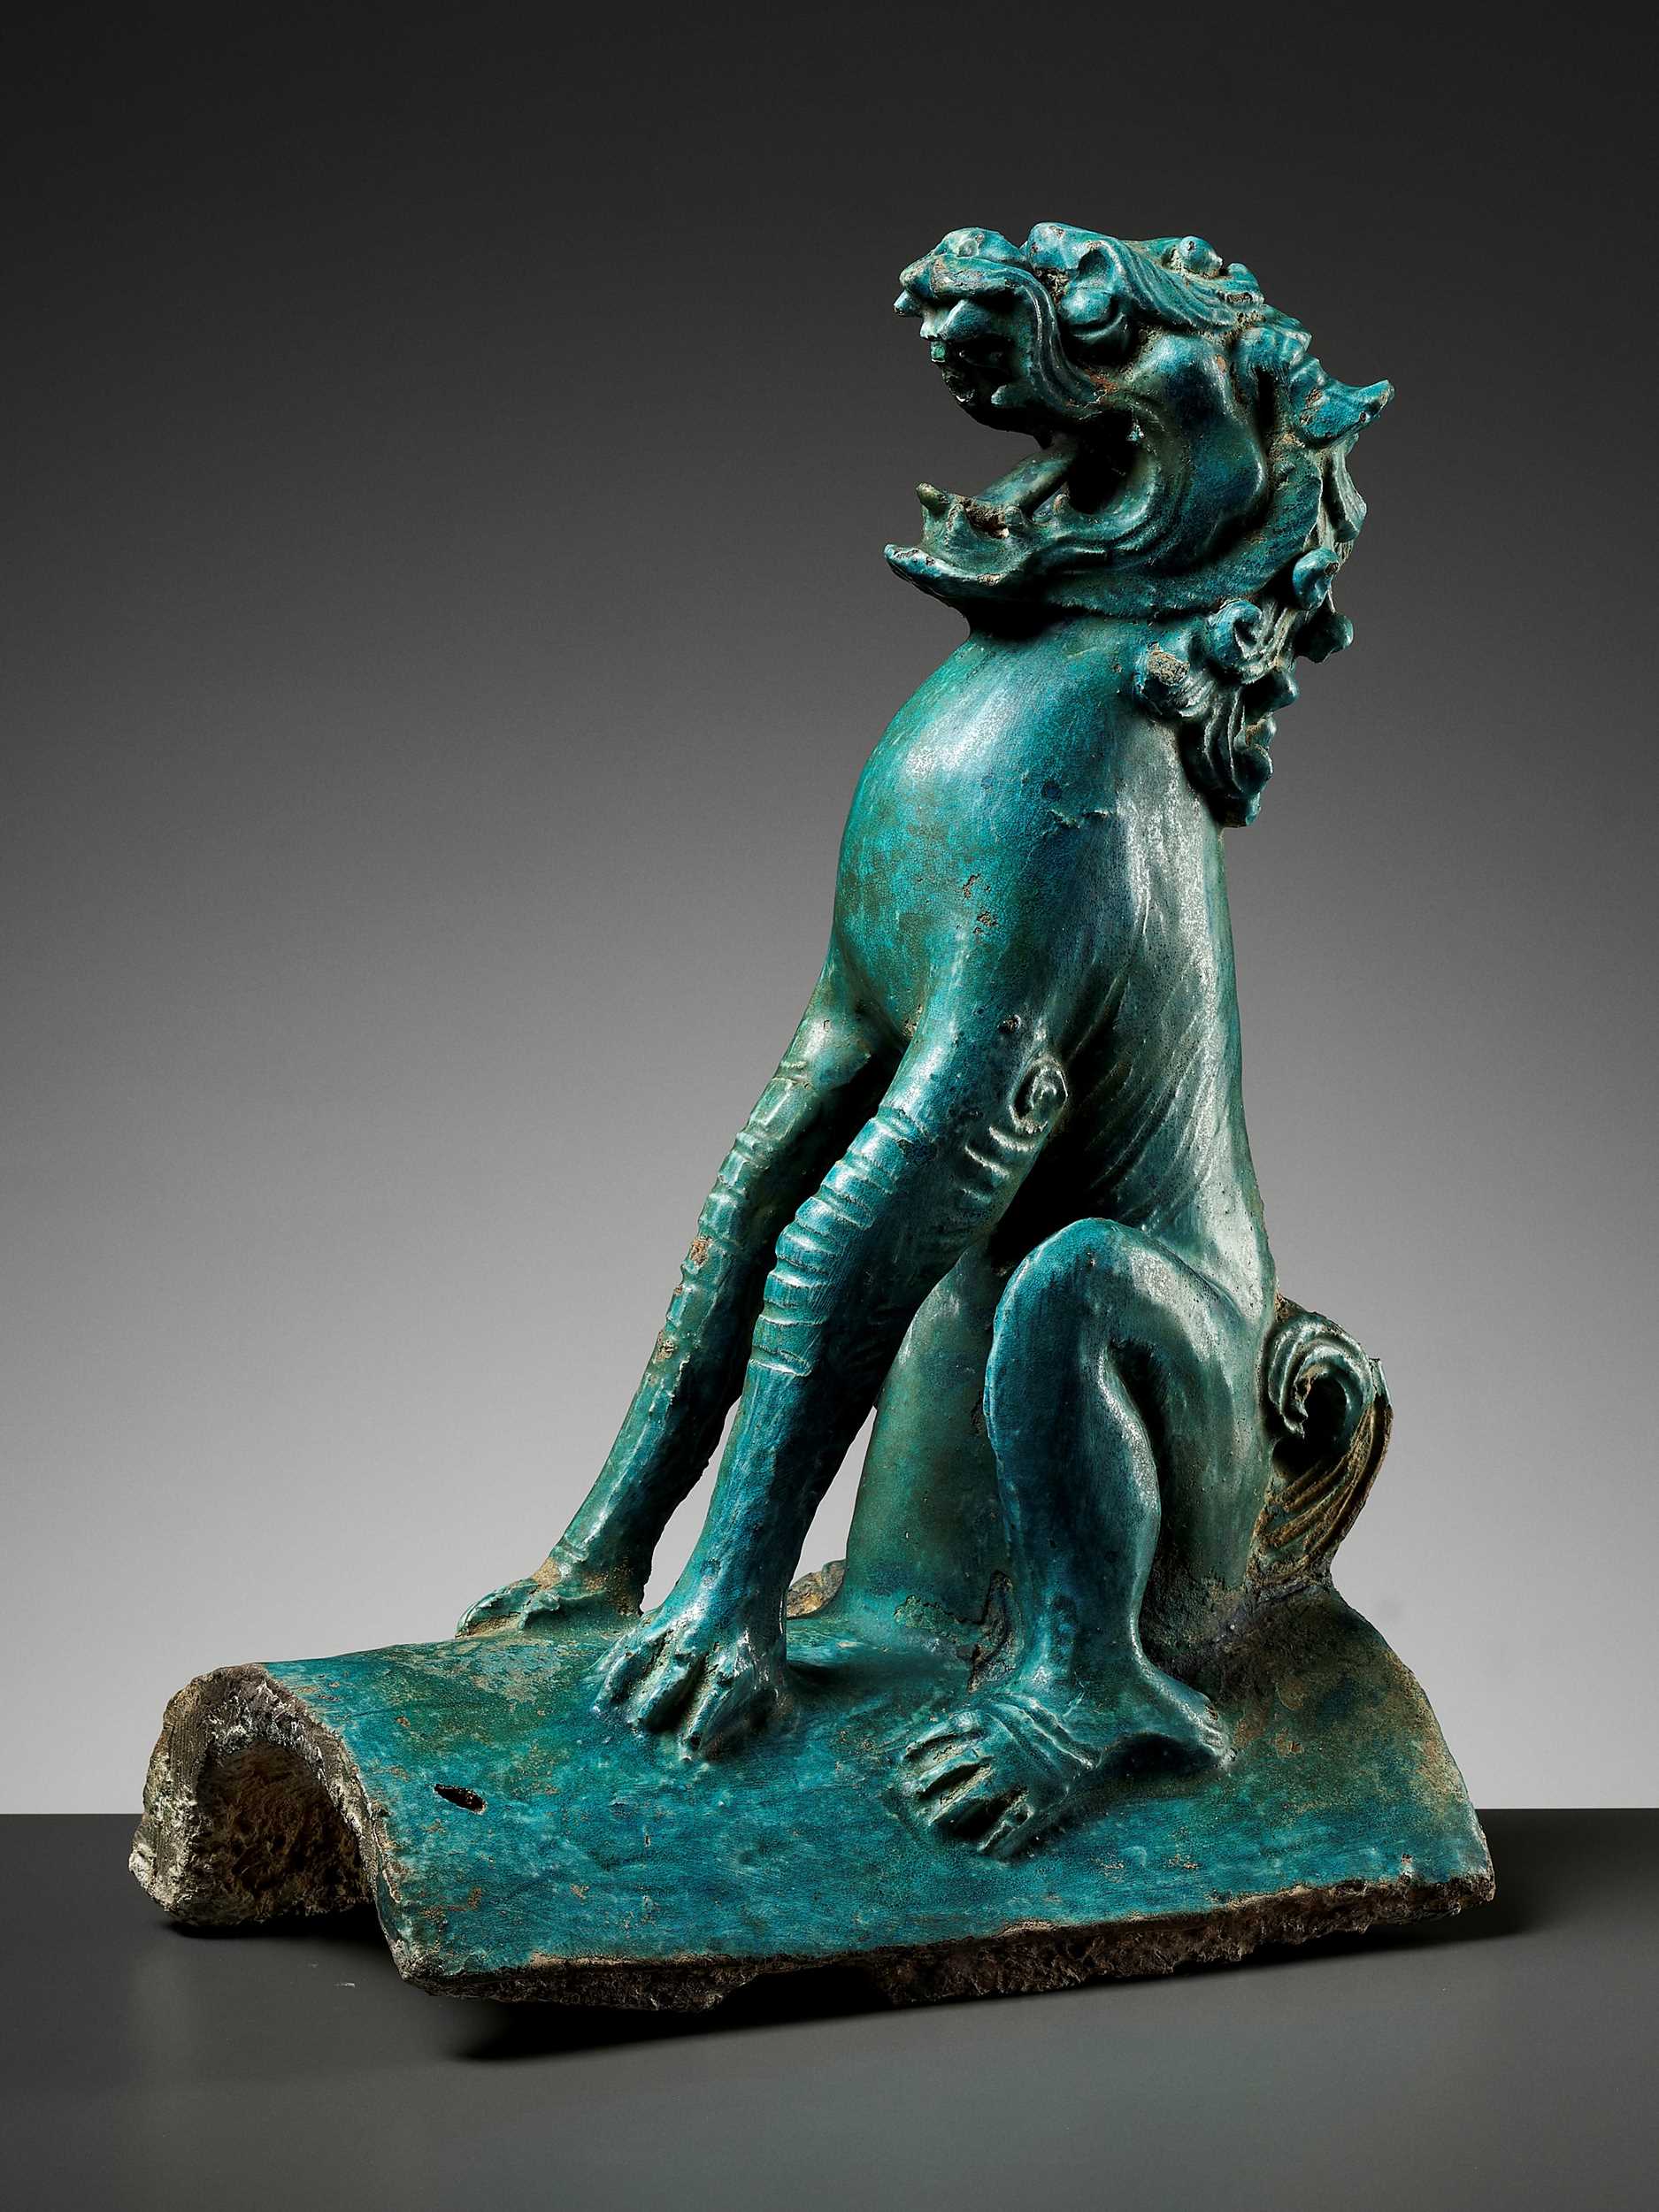 Lot 66 - A TURQUOISE-GLAZED ‘LION’ ROOF TILE, MING DYNASTY